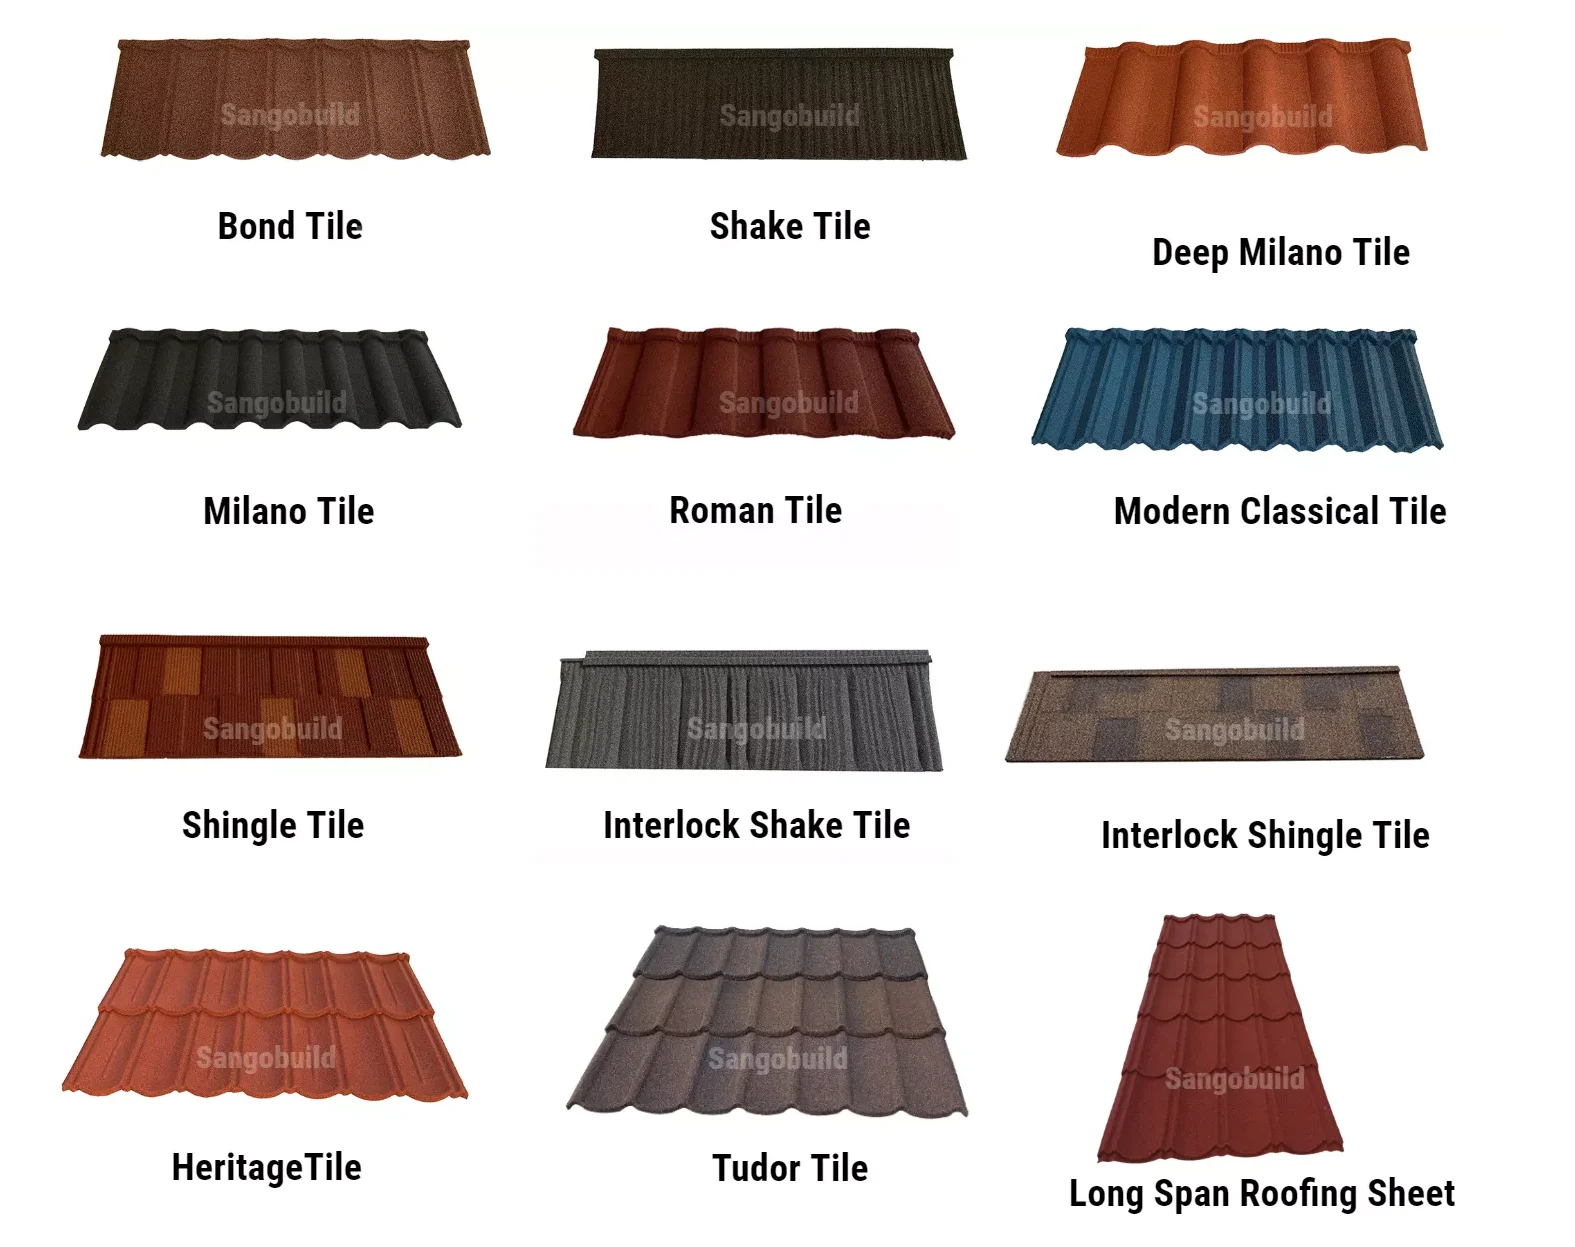 Bond Tiles Classic Stone Coated Roofing Sheet Metal Roof